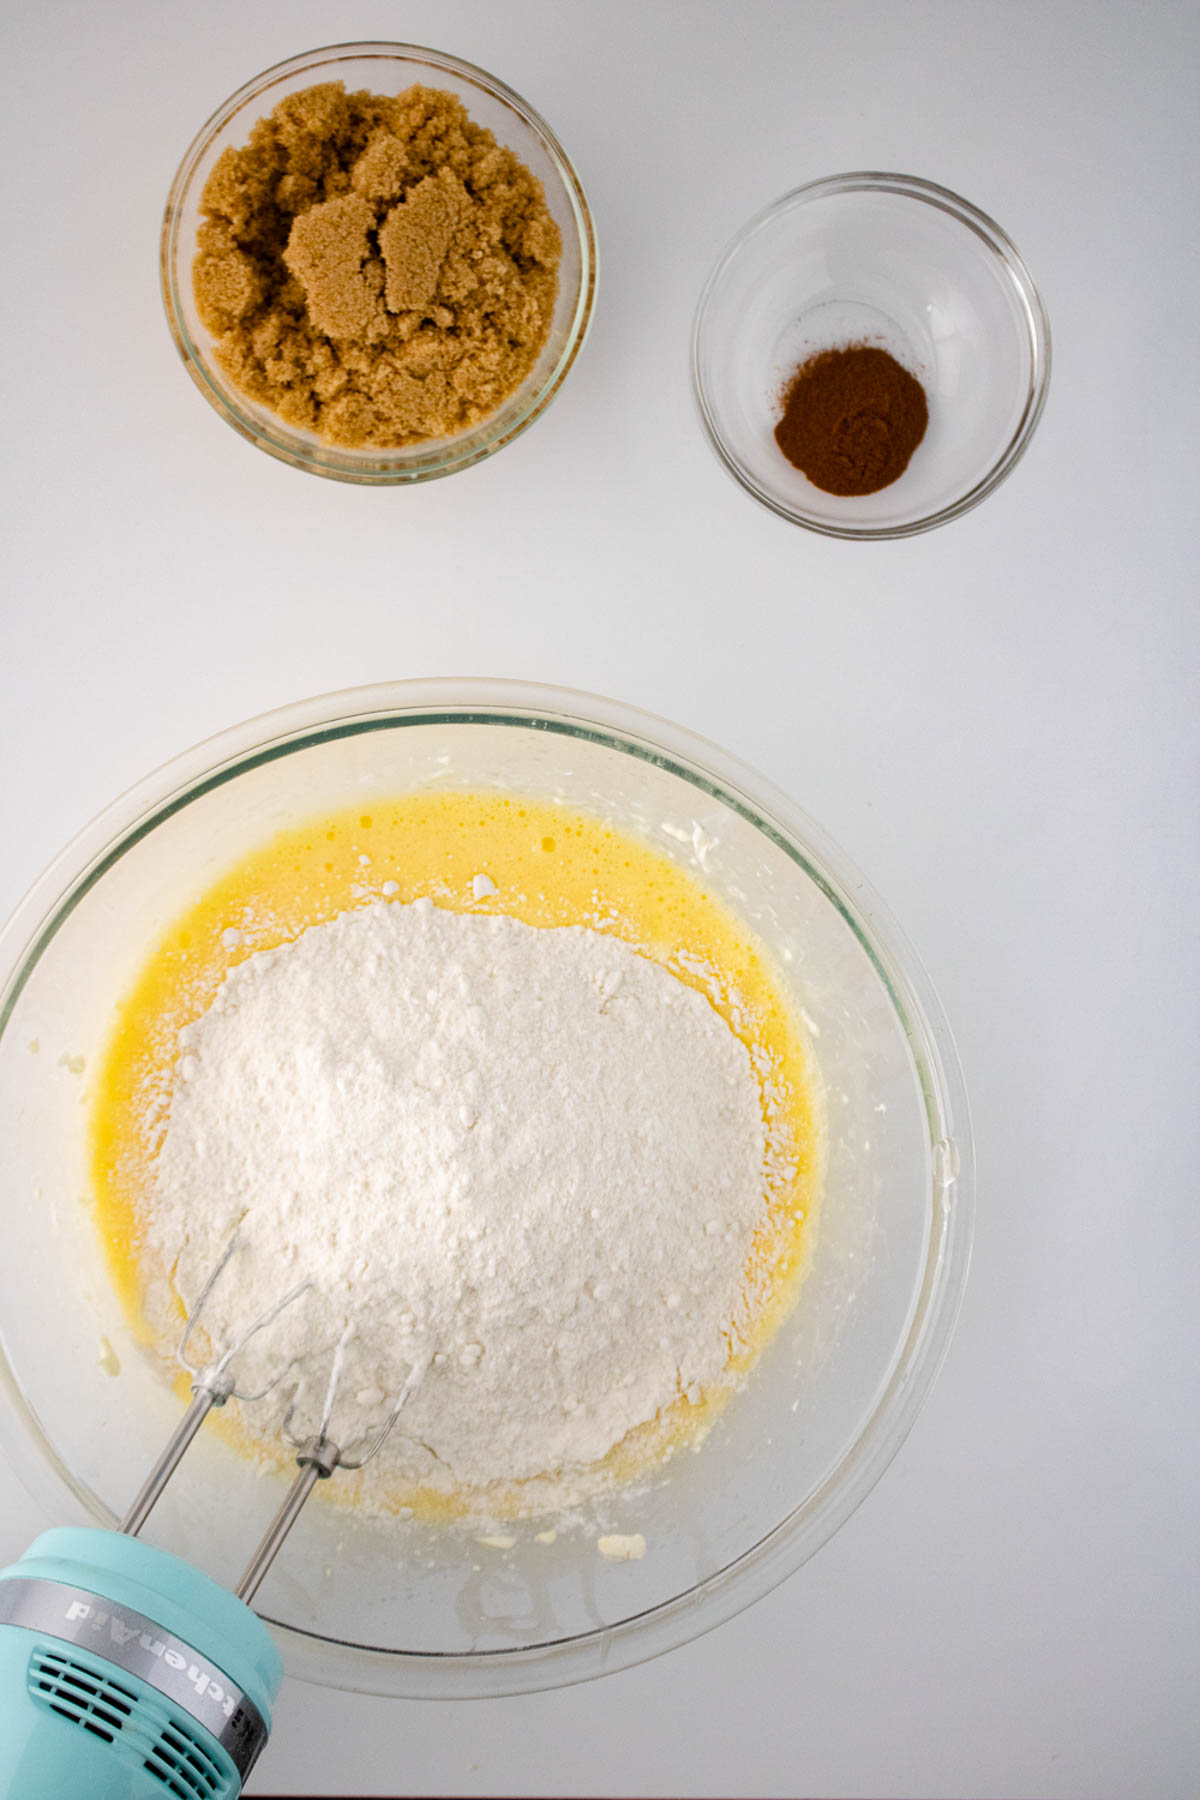 Overhead view of ingredients for a honey bun cake, featuring a bowl with flour and egg mixture, accompanied by bowls of brown sugar and cinnamon, with a hand mixer in use.